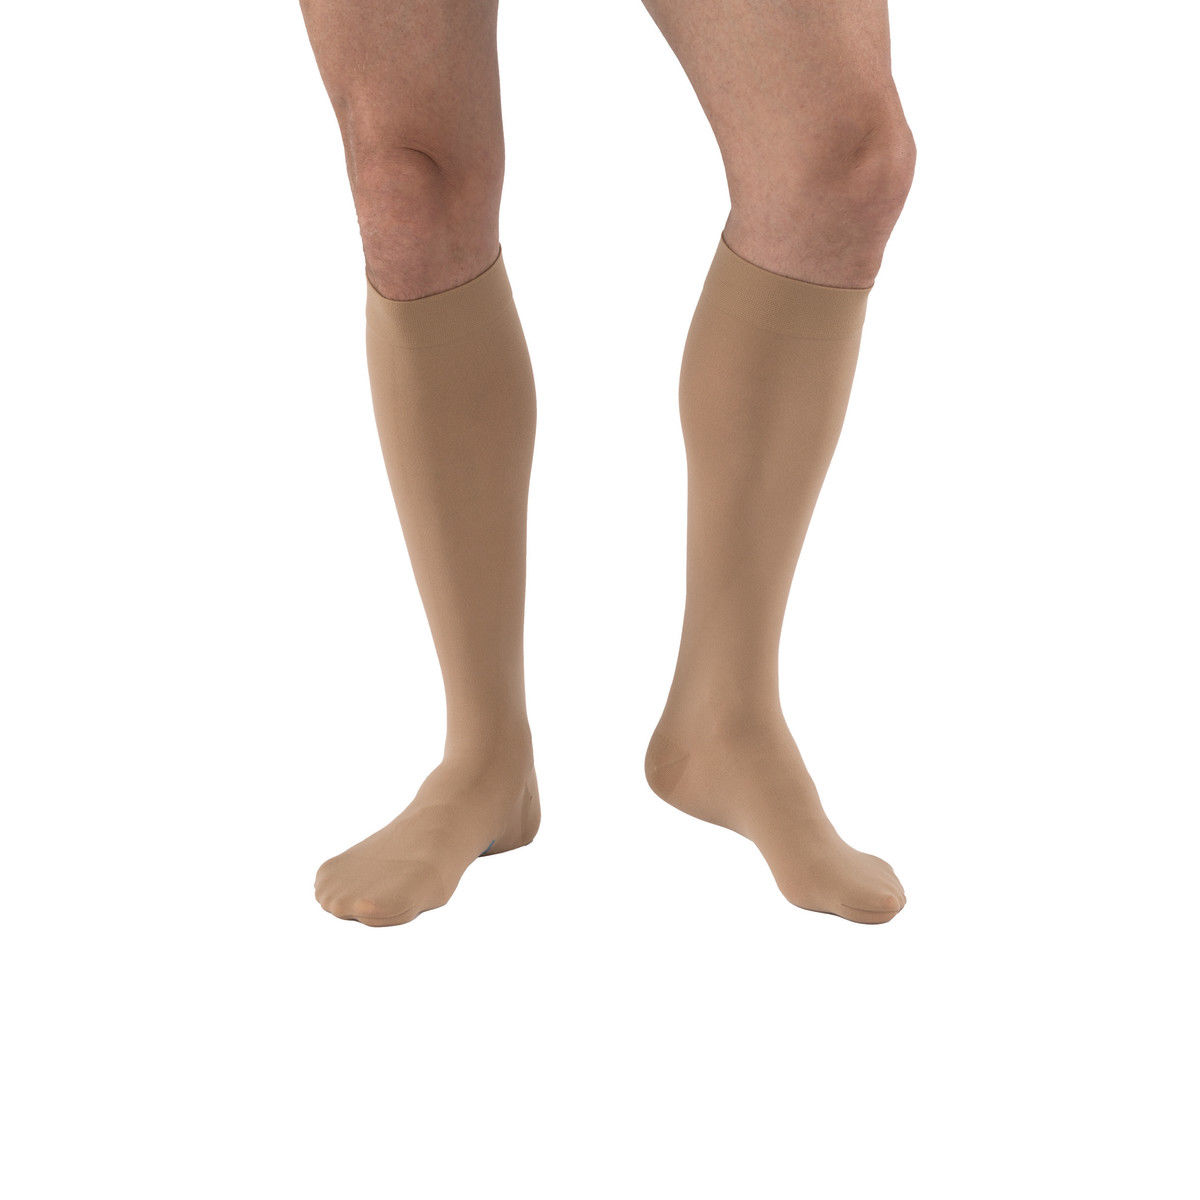 Lymphedema Products & Compression Garments